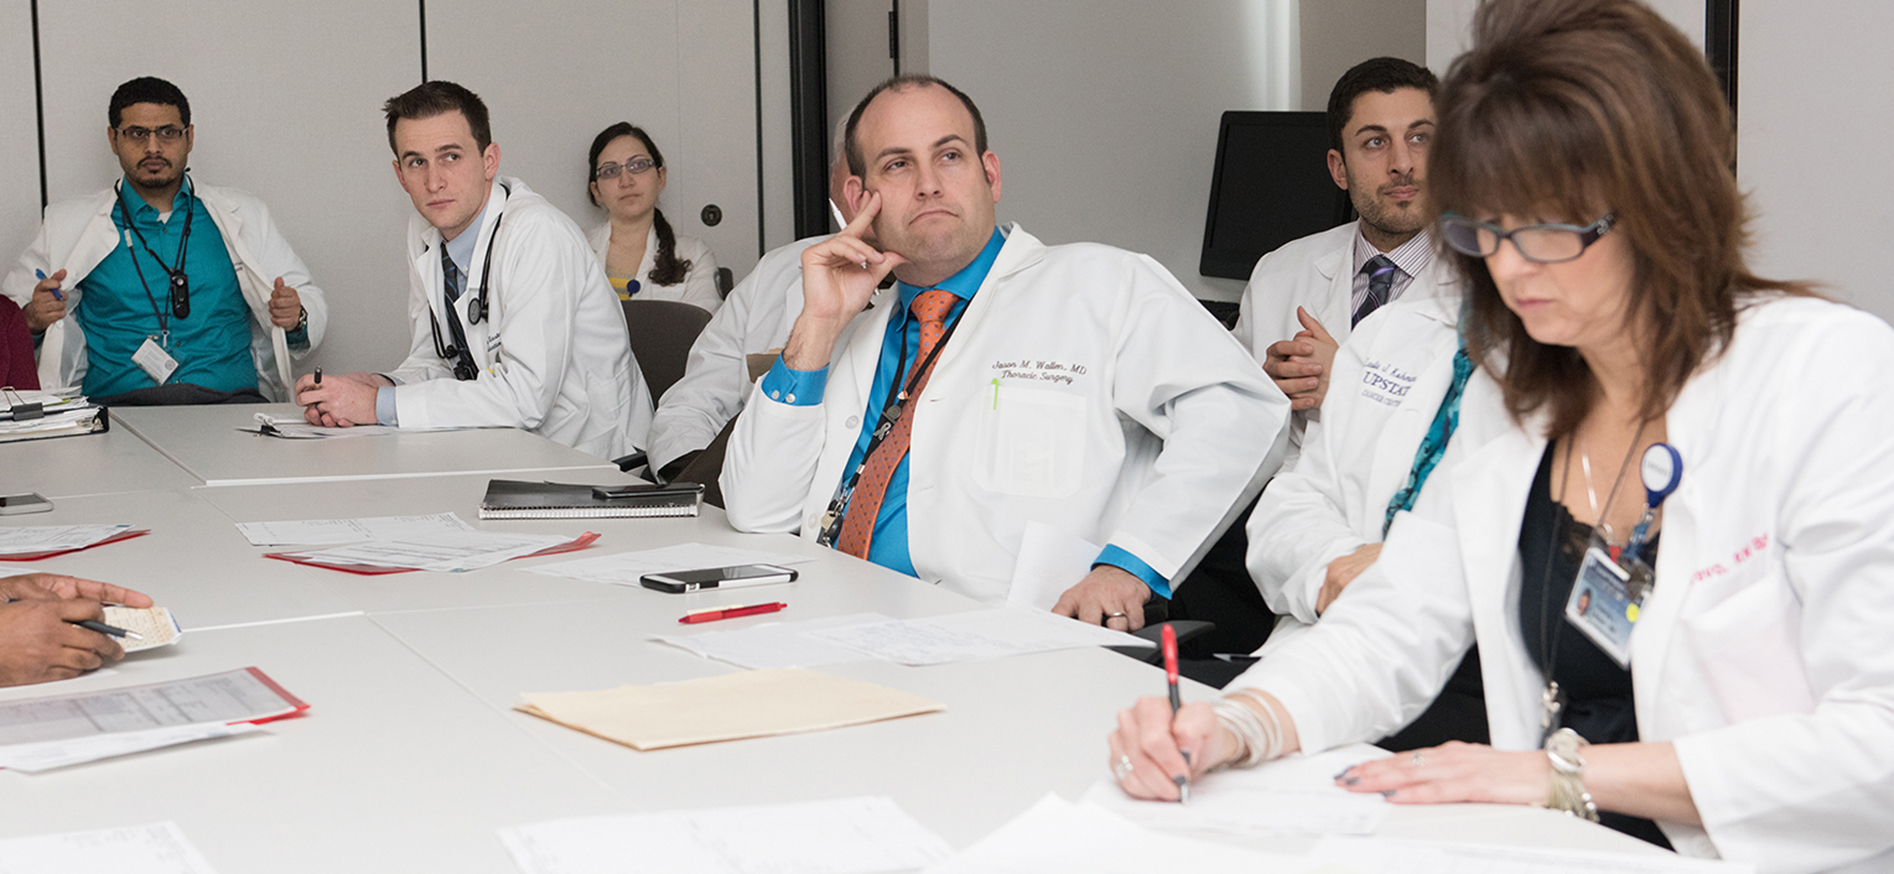 Jason Wallen, MD, center, contemplates a treatment plan for a lung cancer patient during a TOP multidisciplinary team meeting. (photo by Susan Kahn)